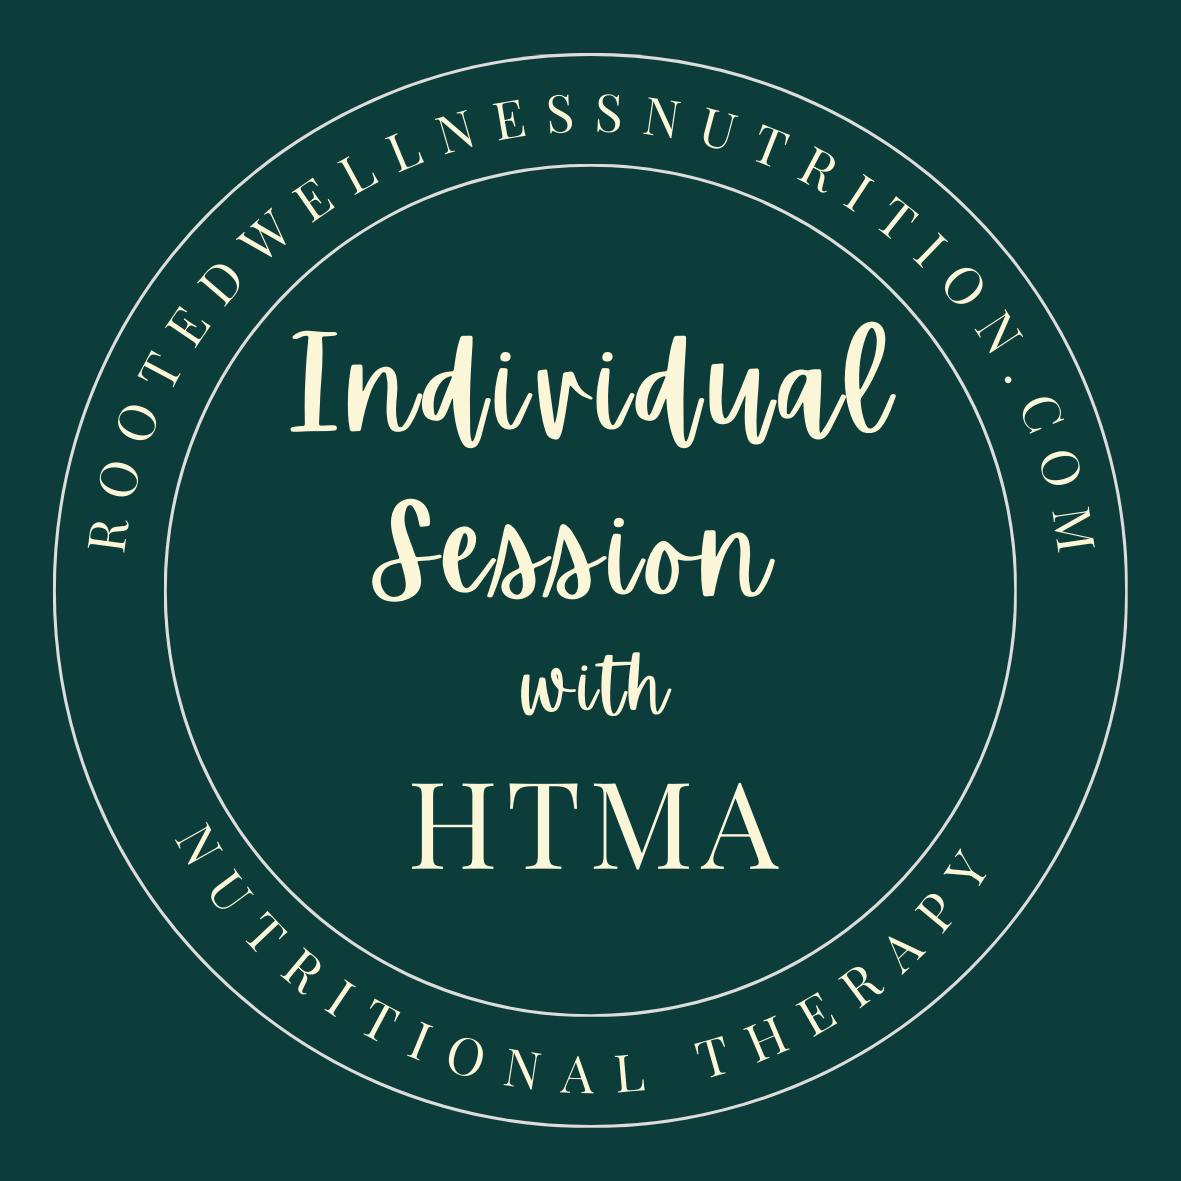 Whole Body Healing with HTMA